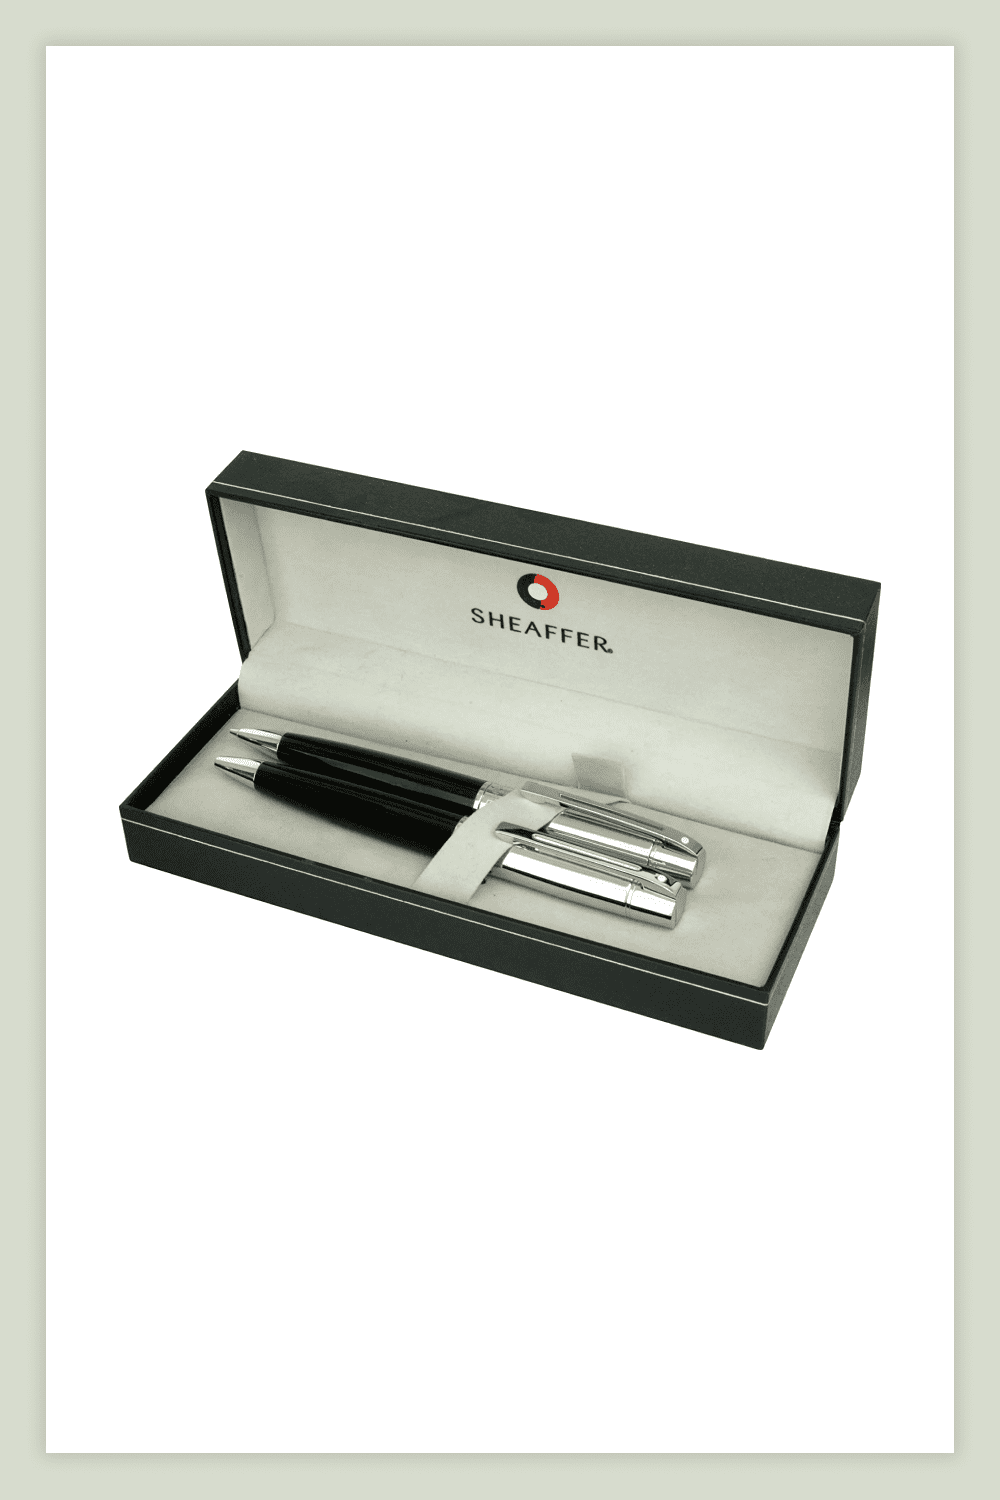 Sheaffer Gift Collection 2 (300) Ball Point Pen/Pencil Set.